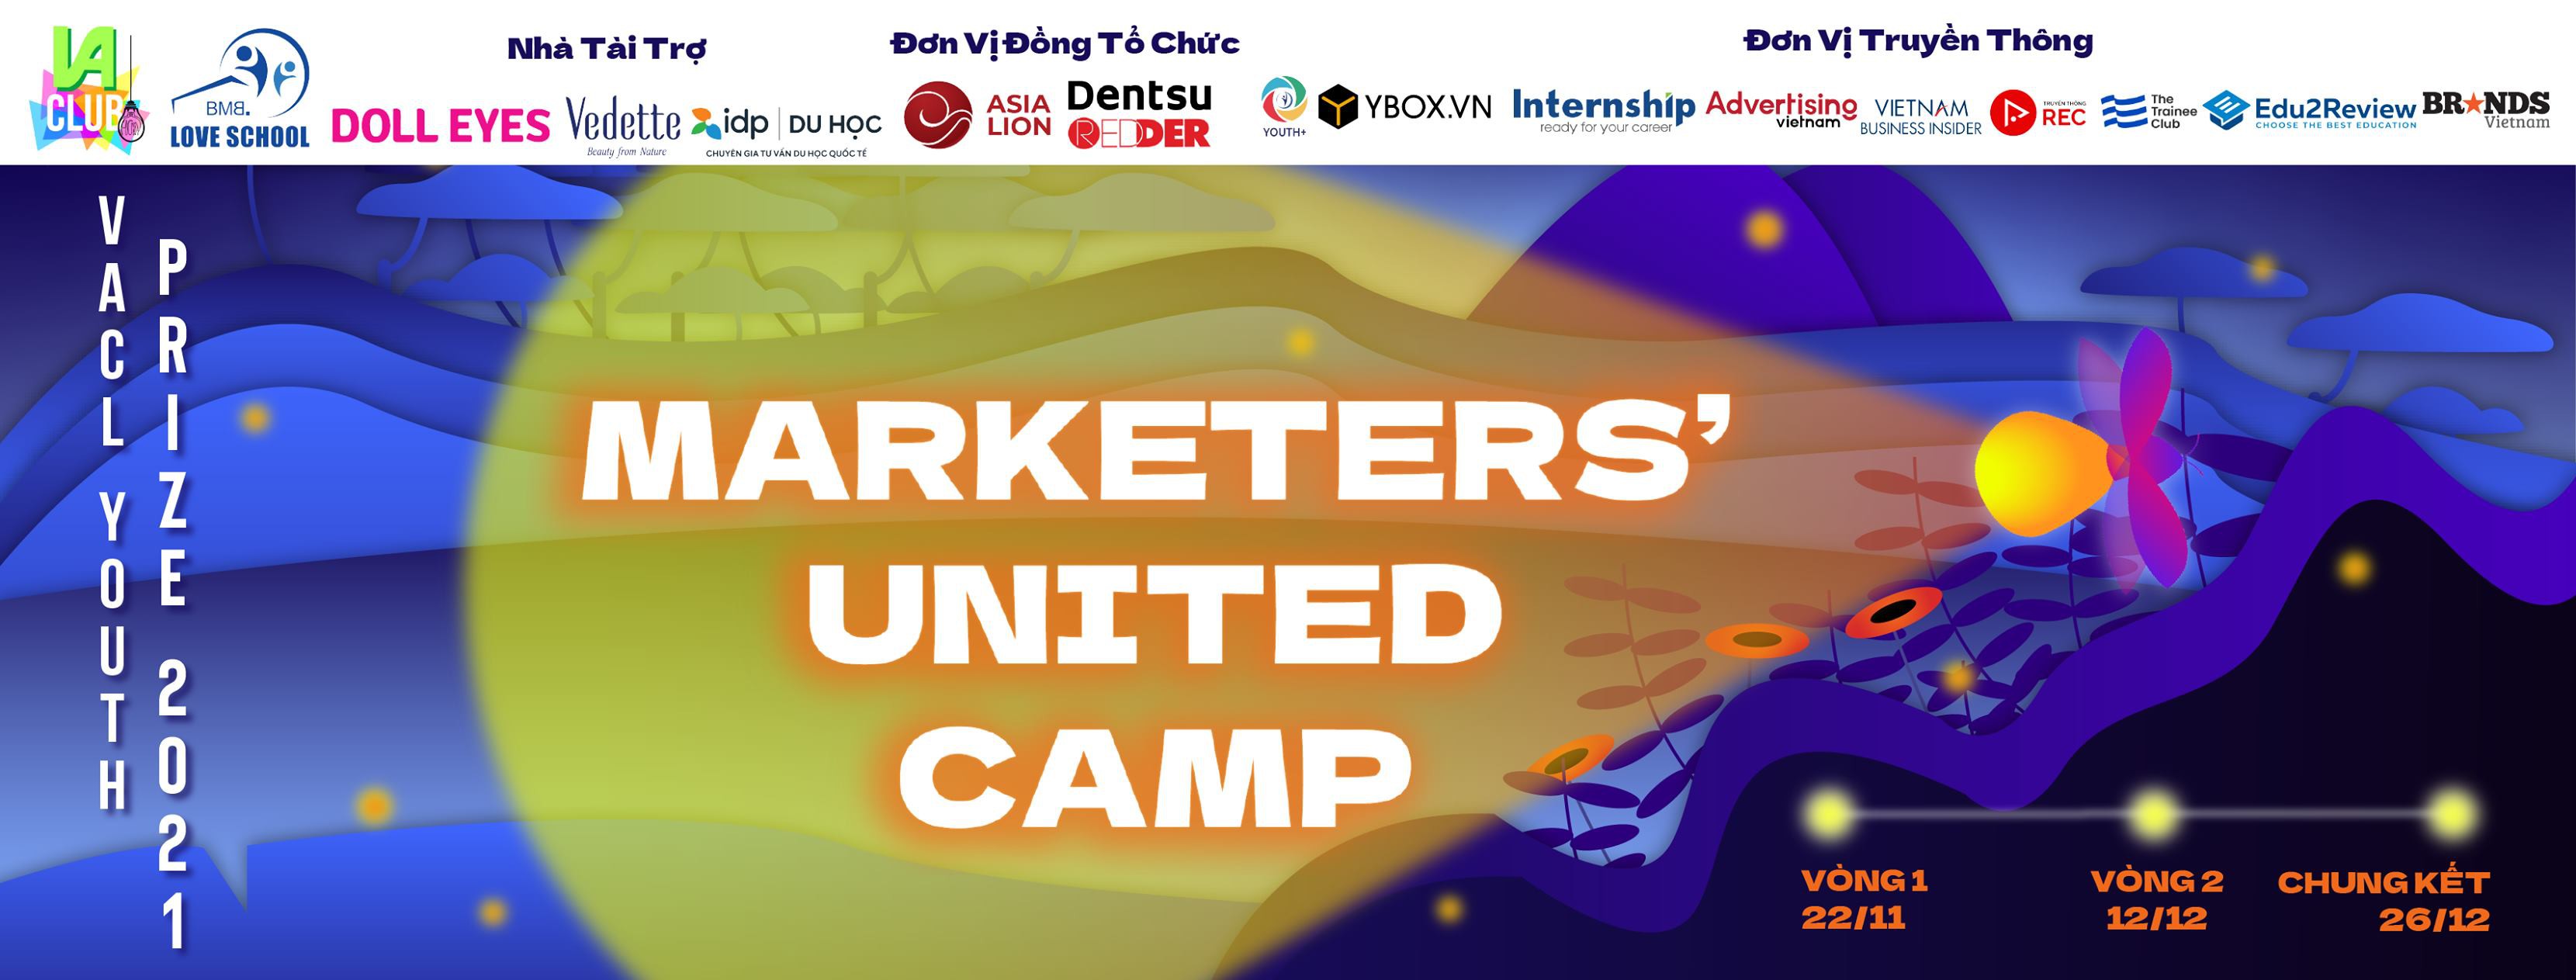 Hội trại VACl Youth Prize 2021 - Marketers' United Camp